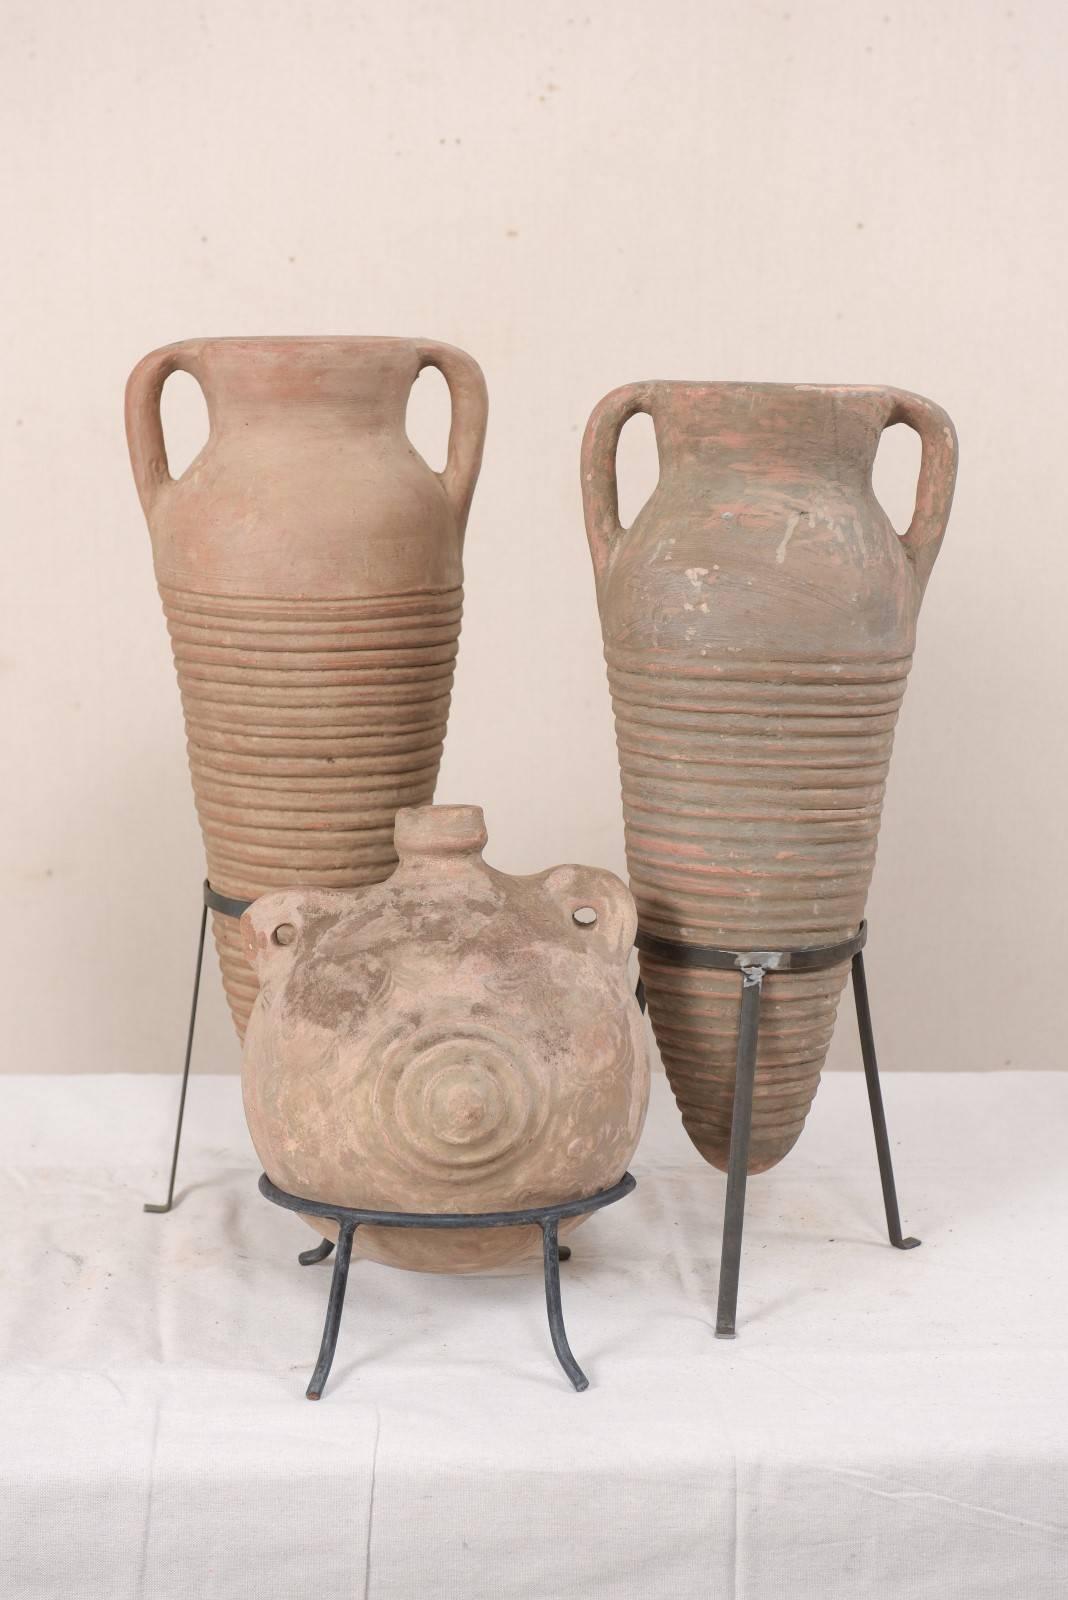 A collection of three Mediterranean terracotta jars on custom stands. These vintage terracotta vessels make for a lovely decorative collection, the two taller ones having nicely ribbed and oblong bodies that taper to a point at their bottoms, the